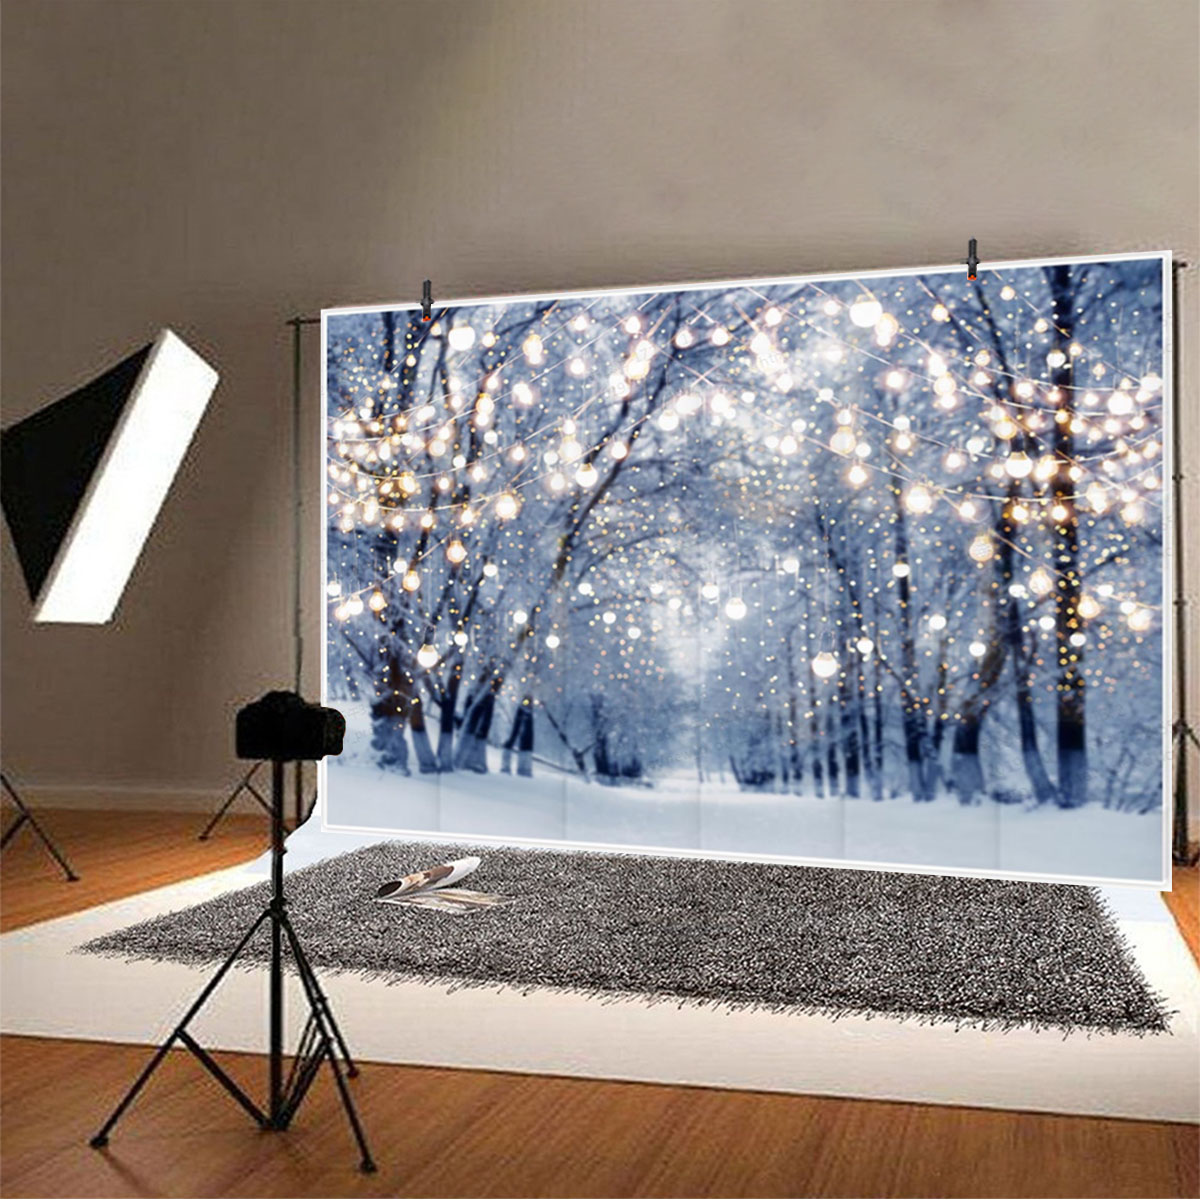 5x3FT-7x5FT-8x6FT-Light-Strip-Winter-Snow-Forest-Street-Photography-Backdrop-Background-Studio-Prop-1609475-4